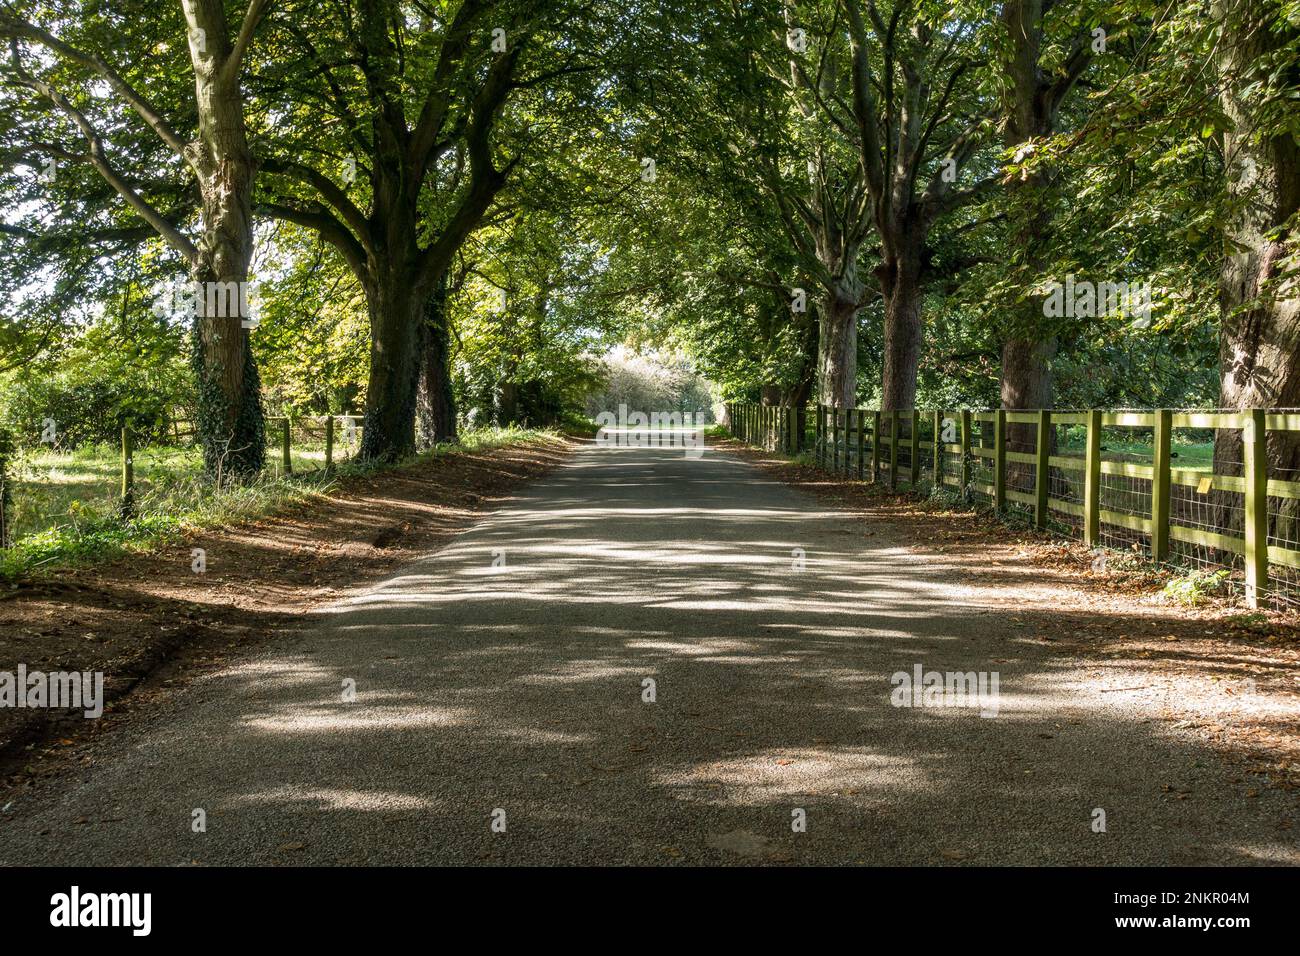 Newbold Lane passes through an avenue of Horse Chestnut trees (Aesculus hippocastanum) and wooden fence, Somerby, Leicestershire, England, UK Stock Photo